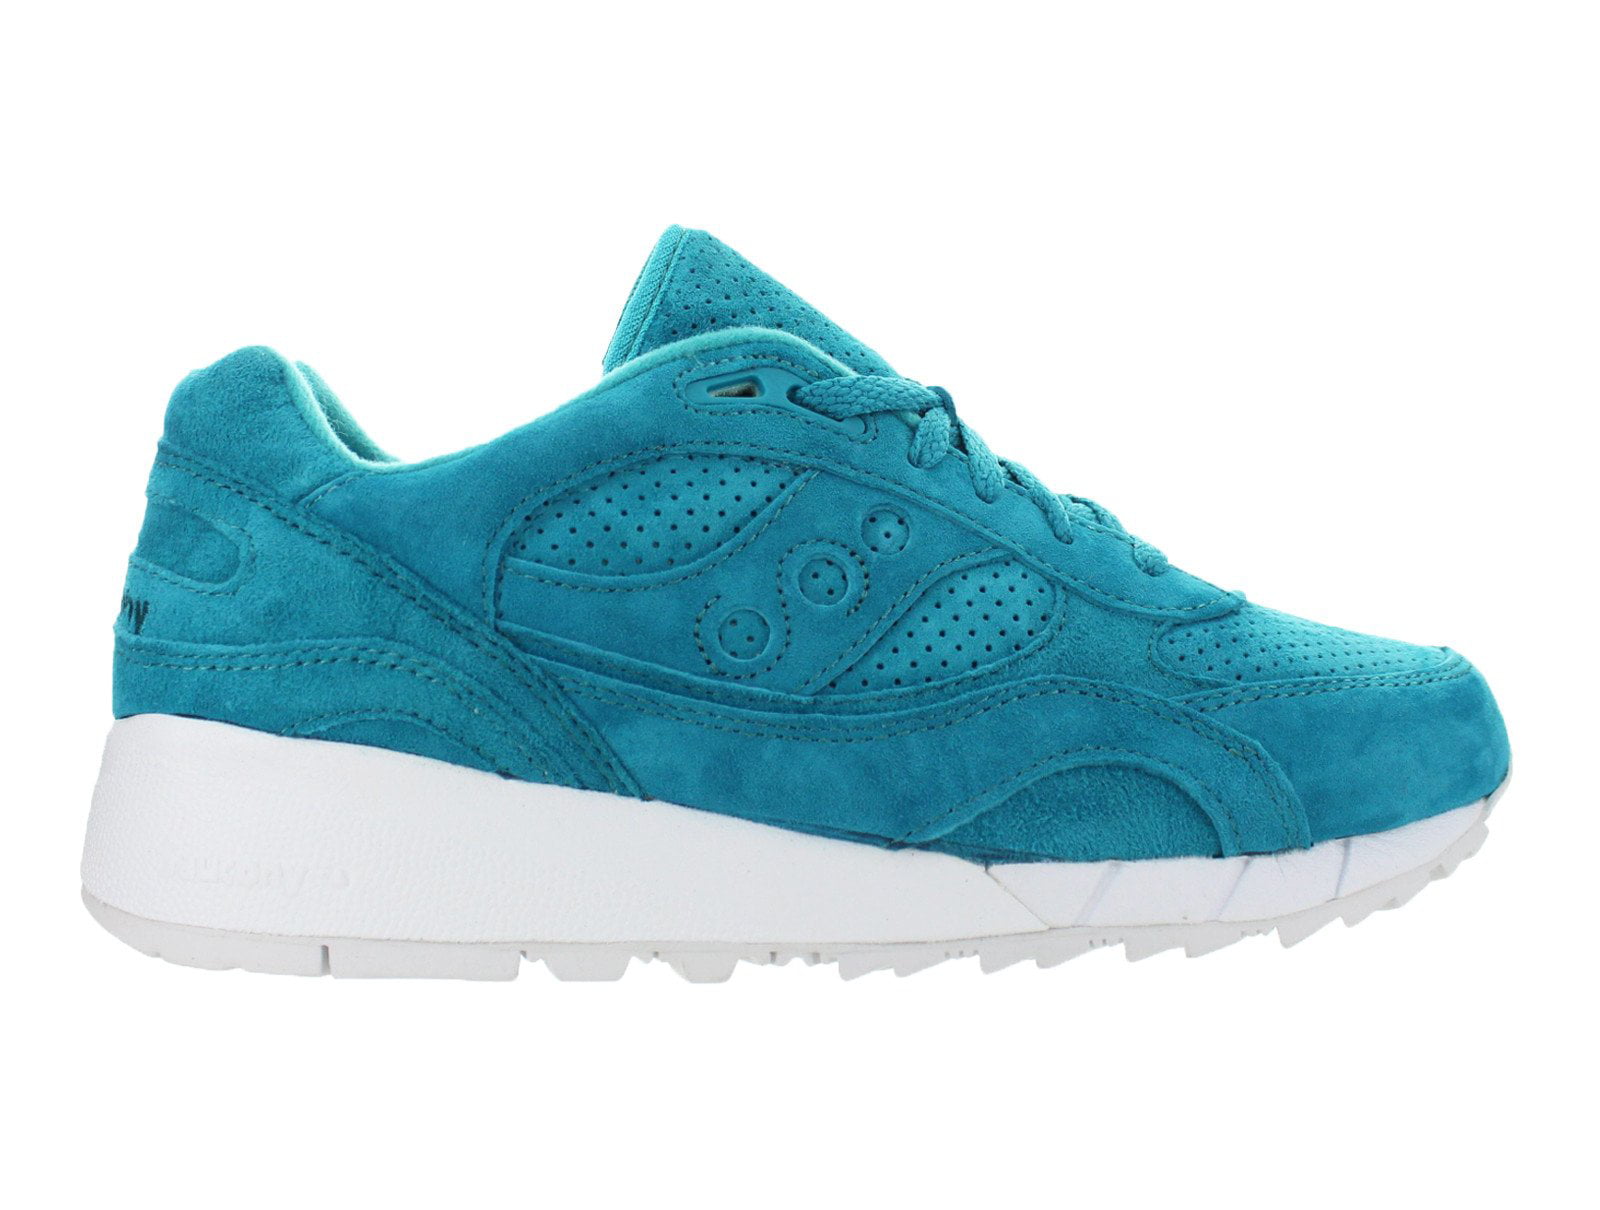 S70222-3 Brand New Saucony Shadow 6000 Men's Athletic Fashion Sneakers 